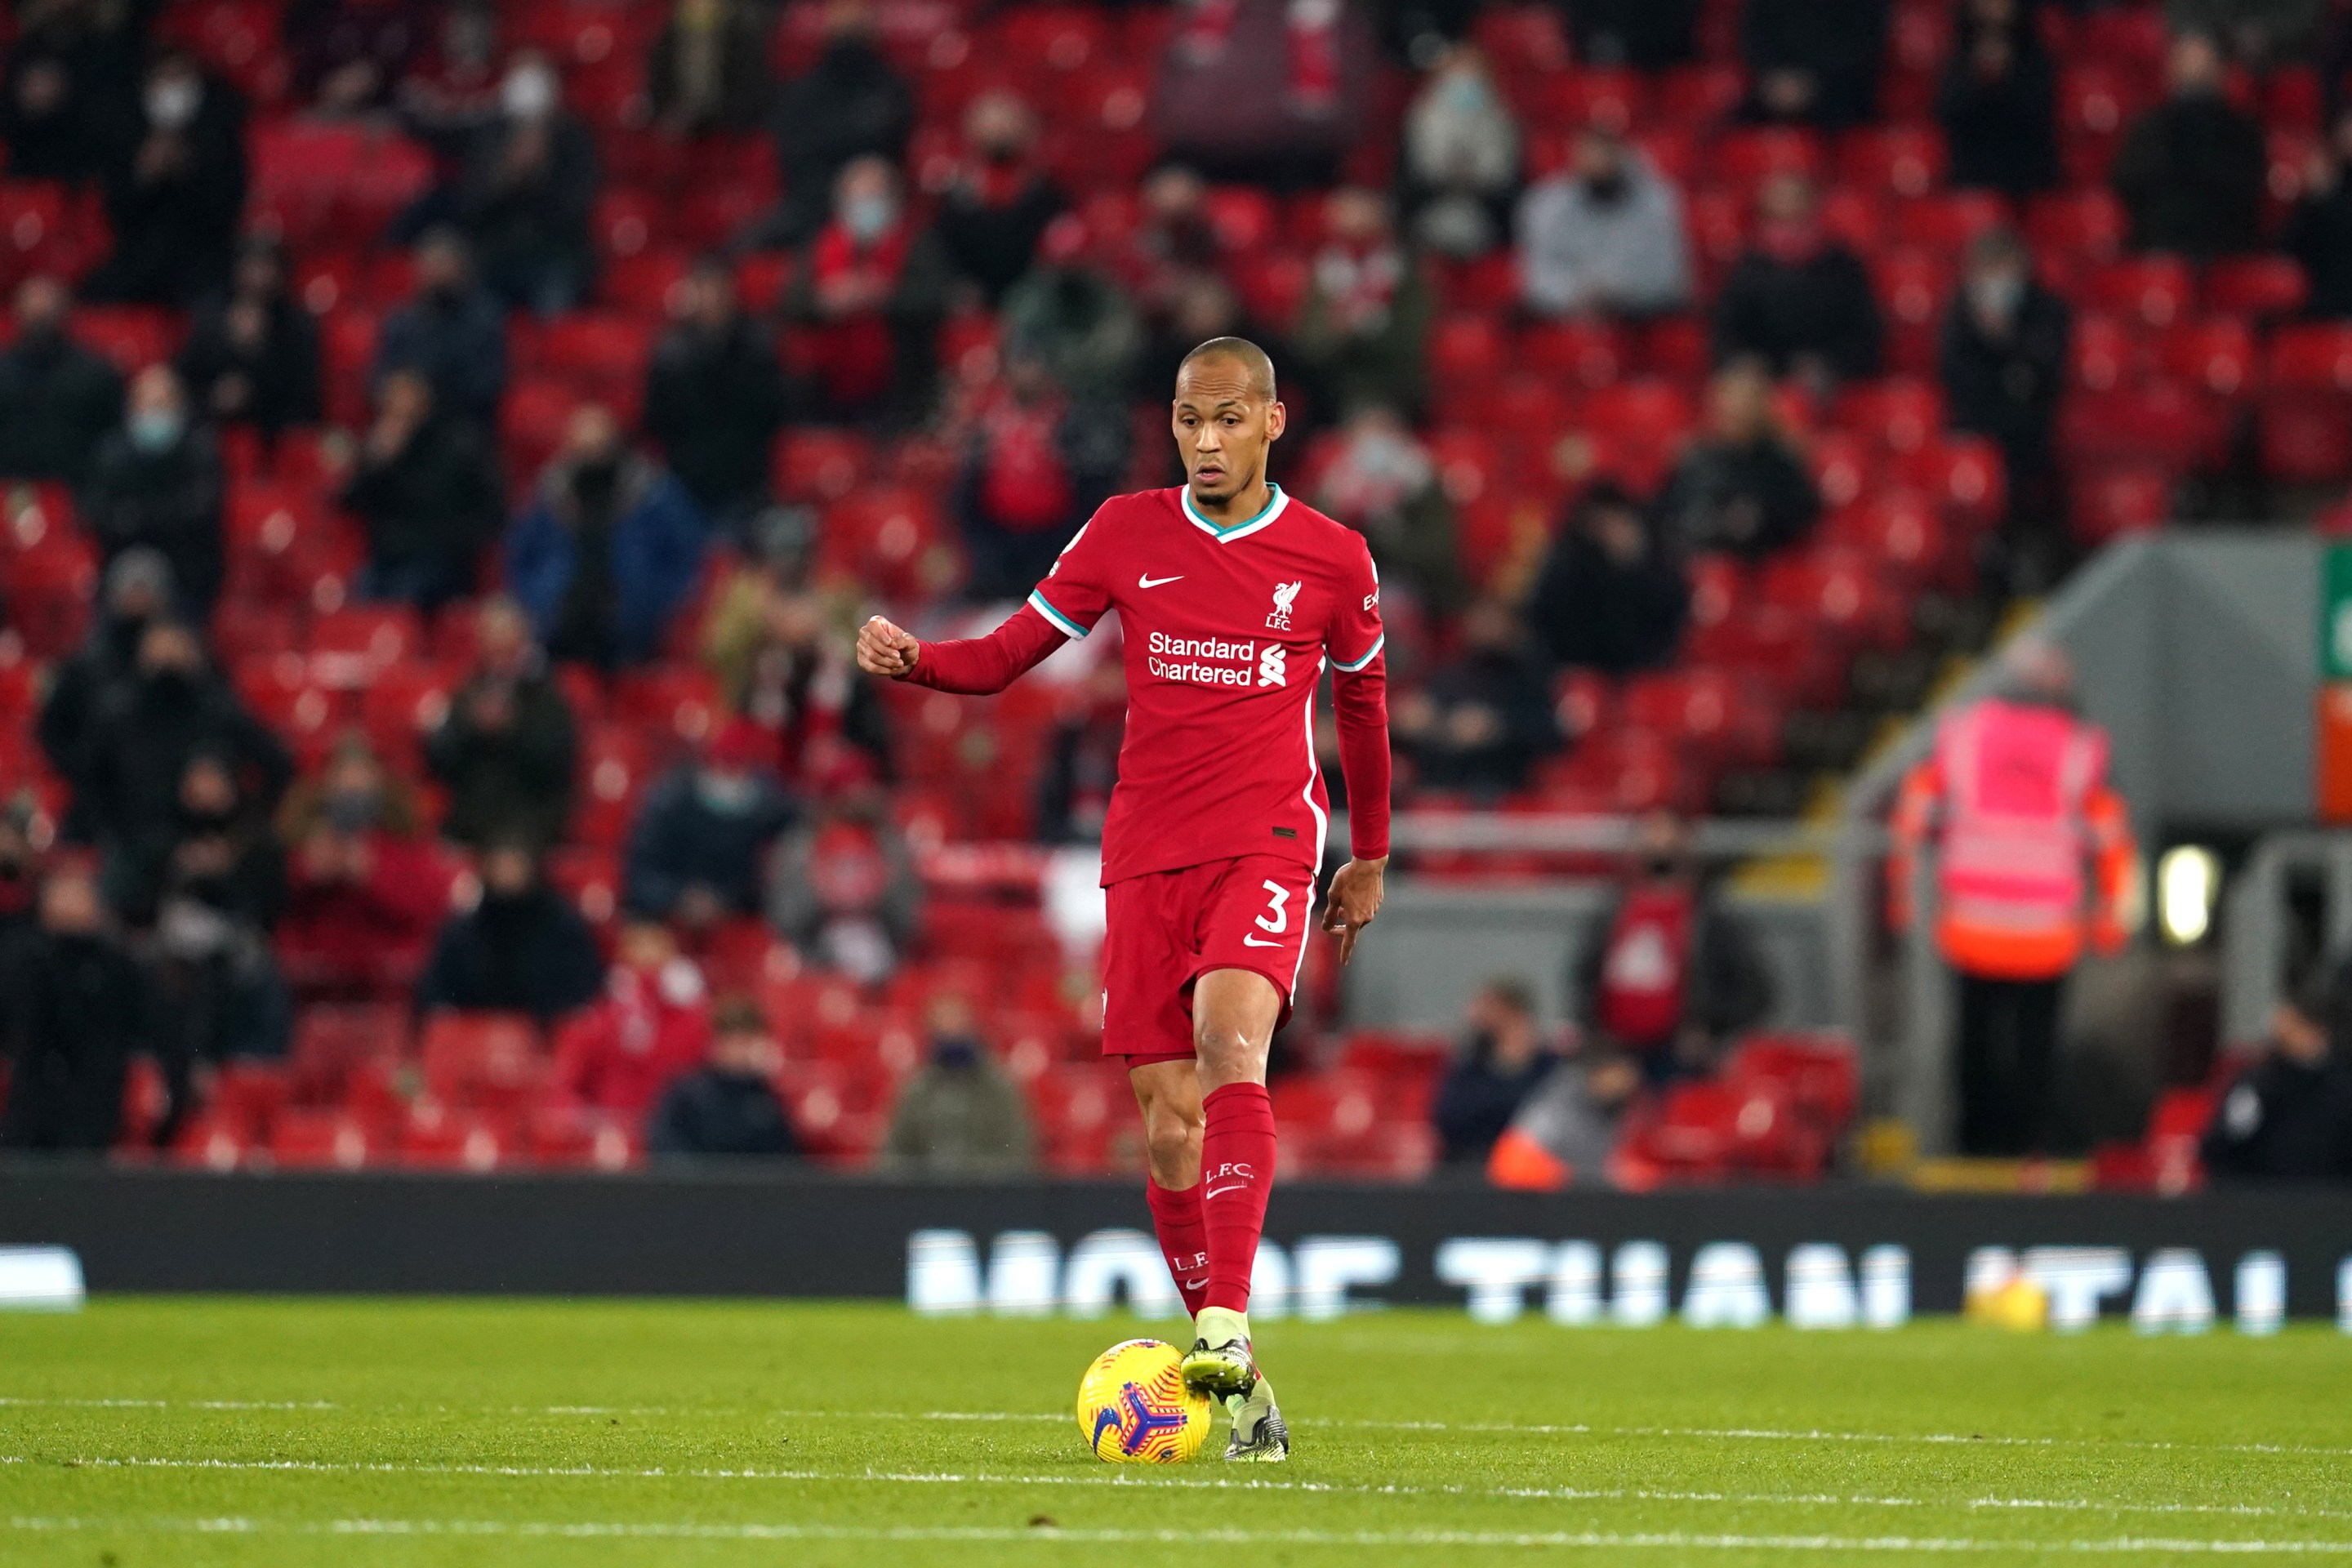 Fabinho of Liverpool in action during the Premier League match between Liverpool and Wolverhampton Wanderers at Anfield on December 06, 2020 in Liverpool, England.